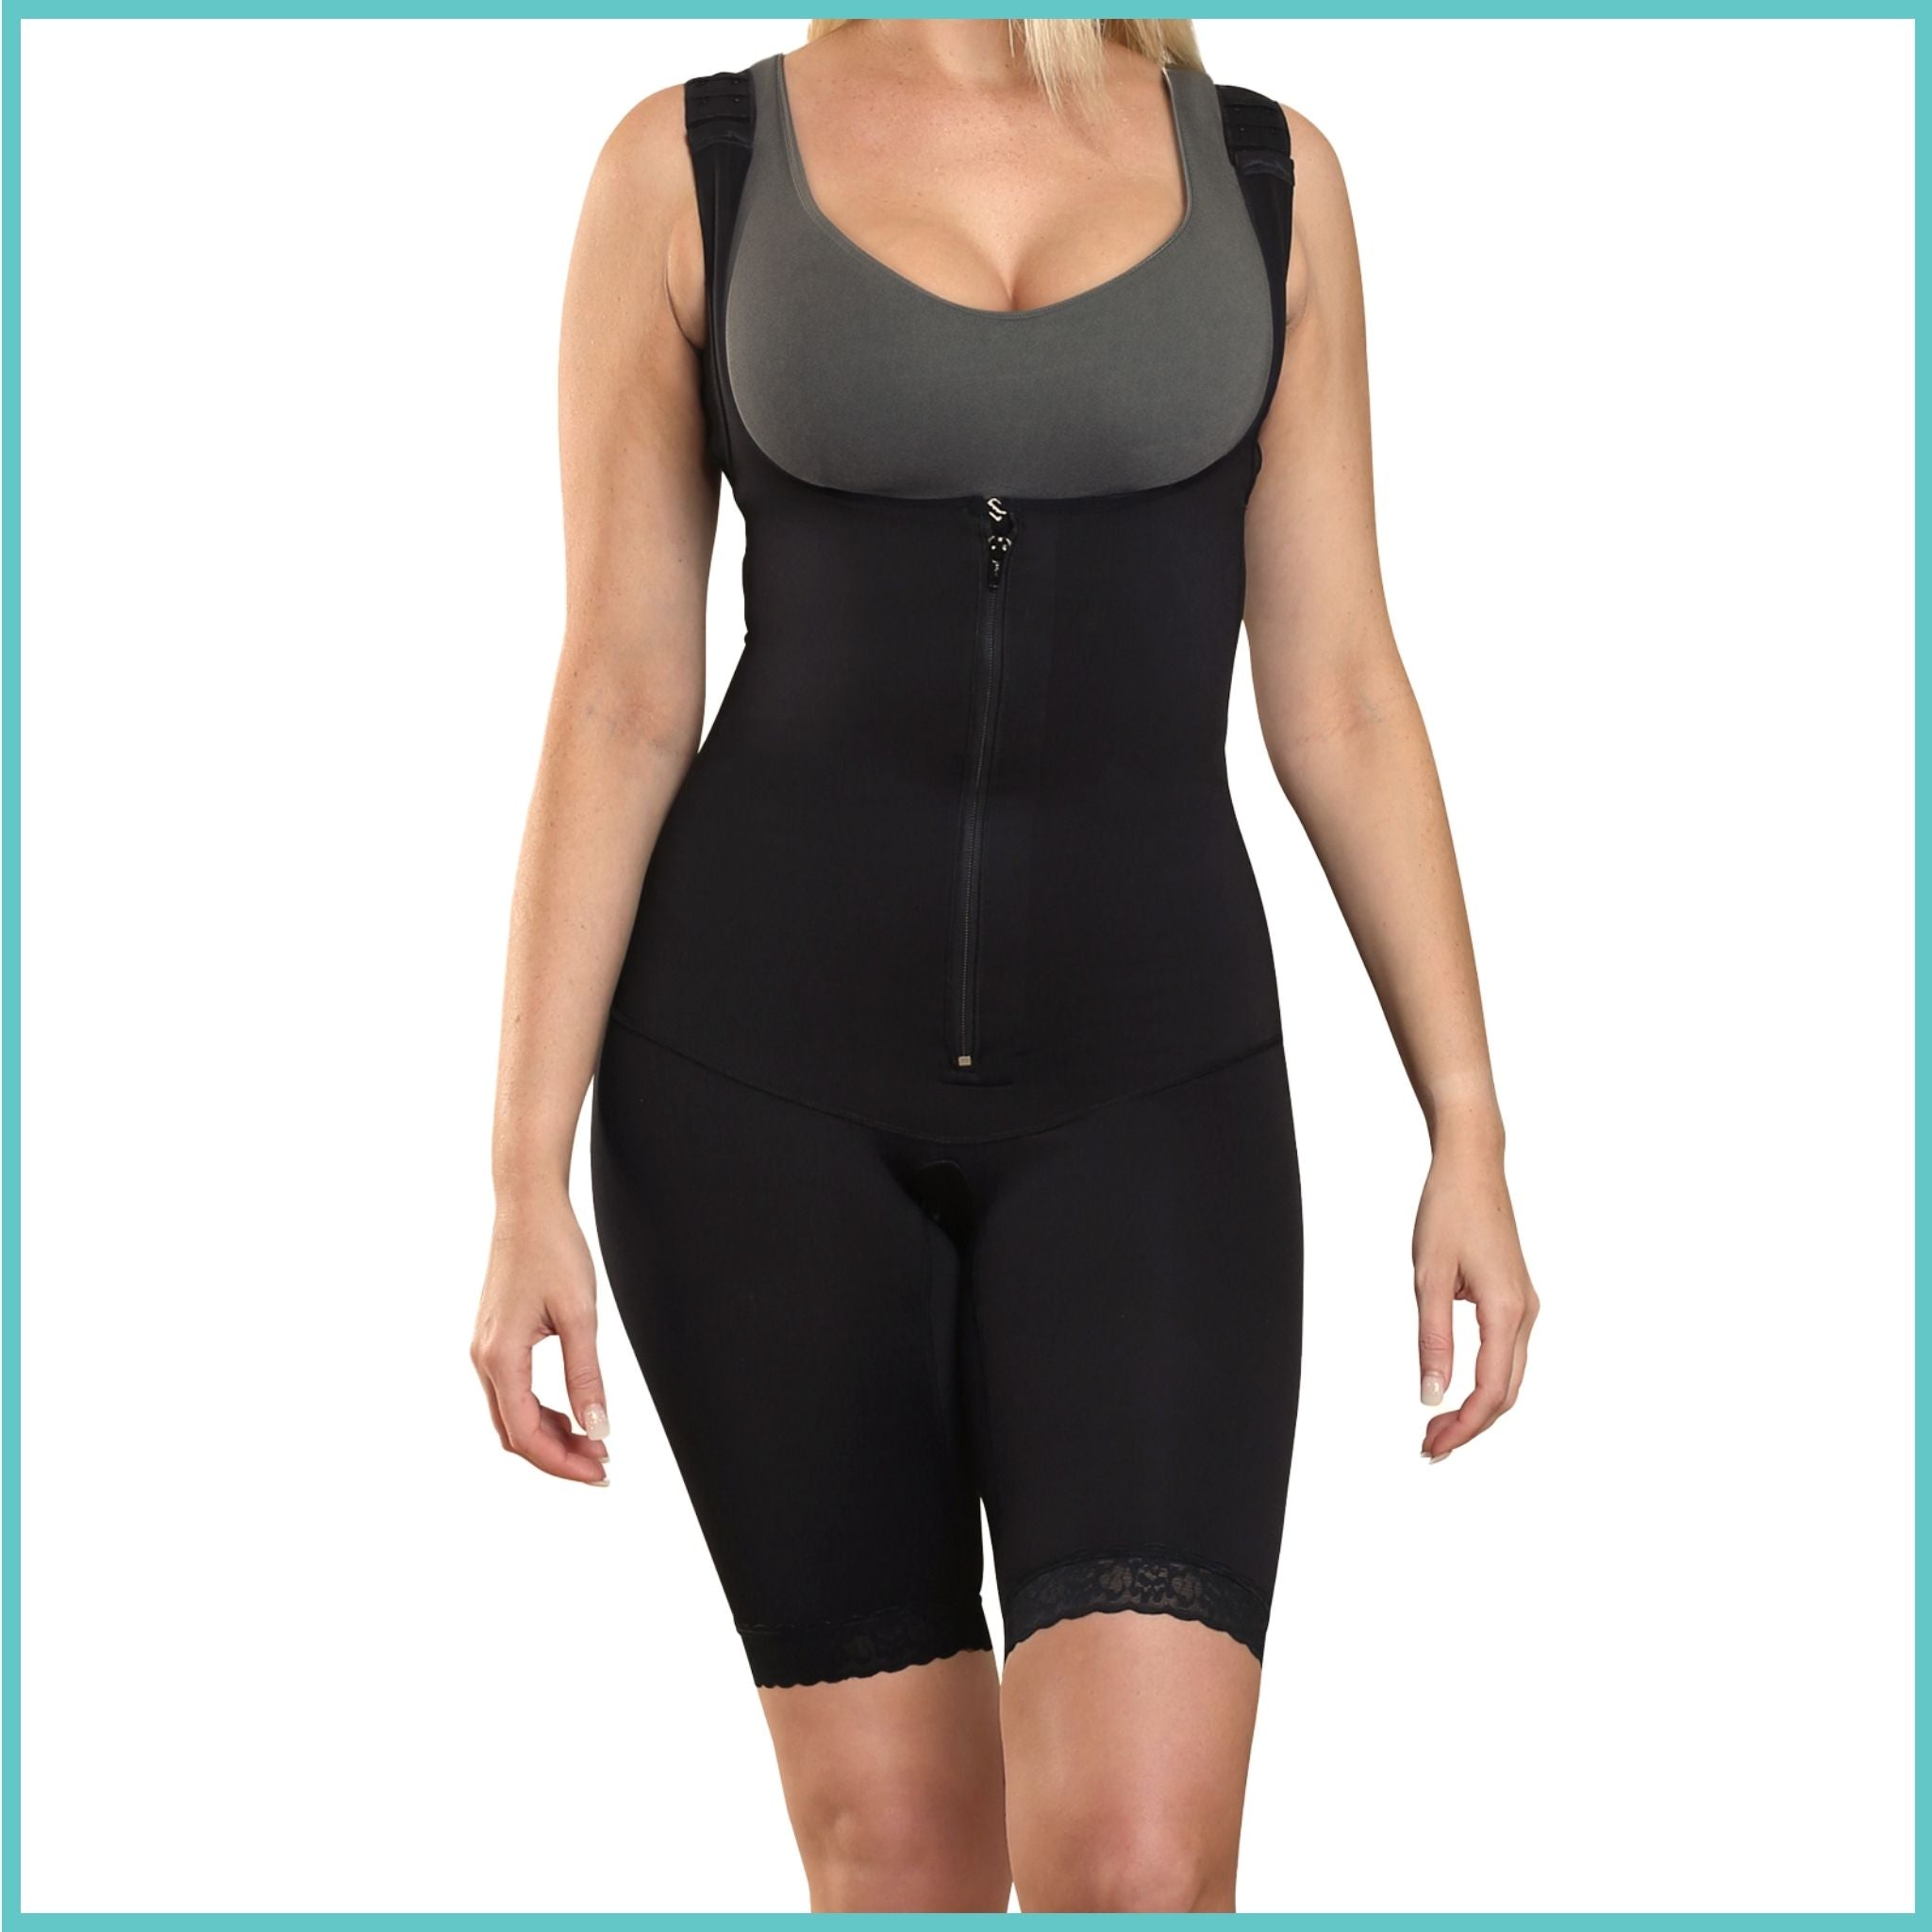 Stage 1 or Stage 2 Medical Garments, here's how to know what Stage  compression you need post surgery. - Medical Compression Garments Australia